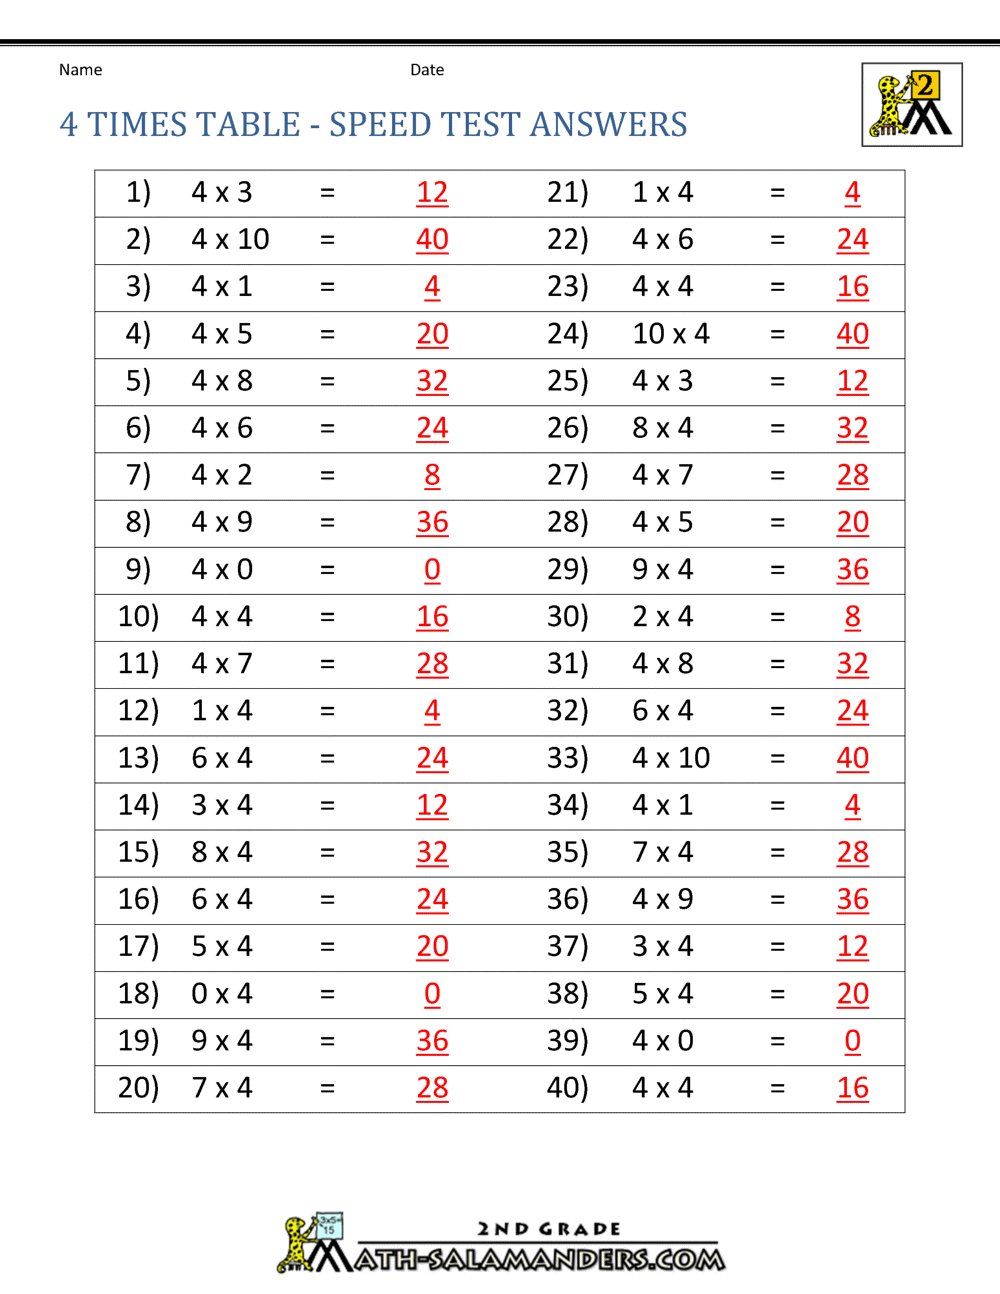 the 4 times table chart